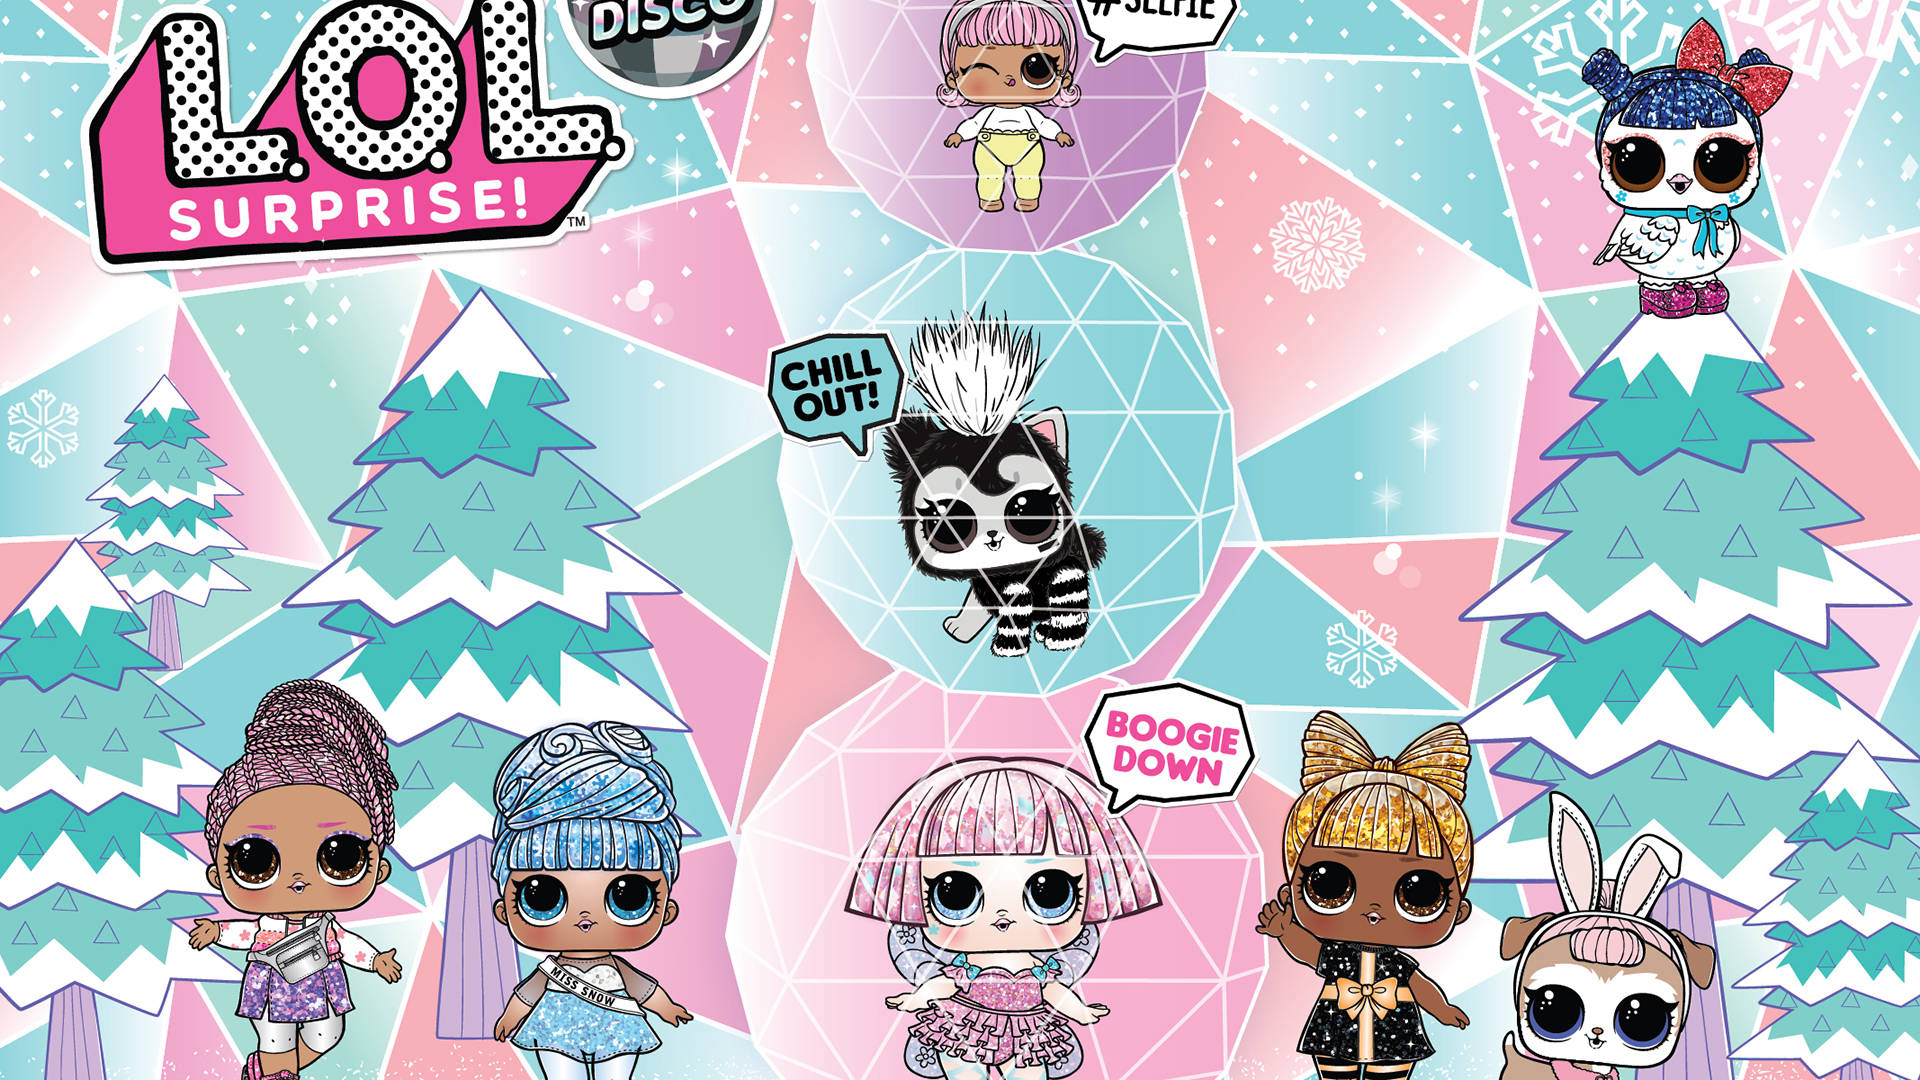 Dress up in style with the fashionable Lol Doll! Wallpaper